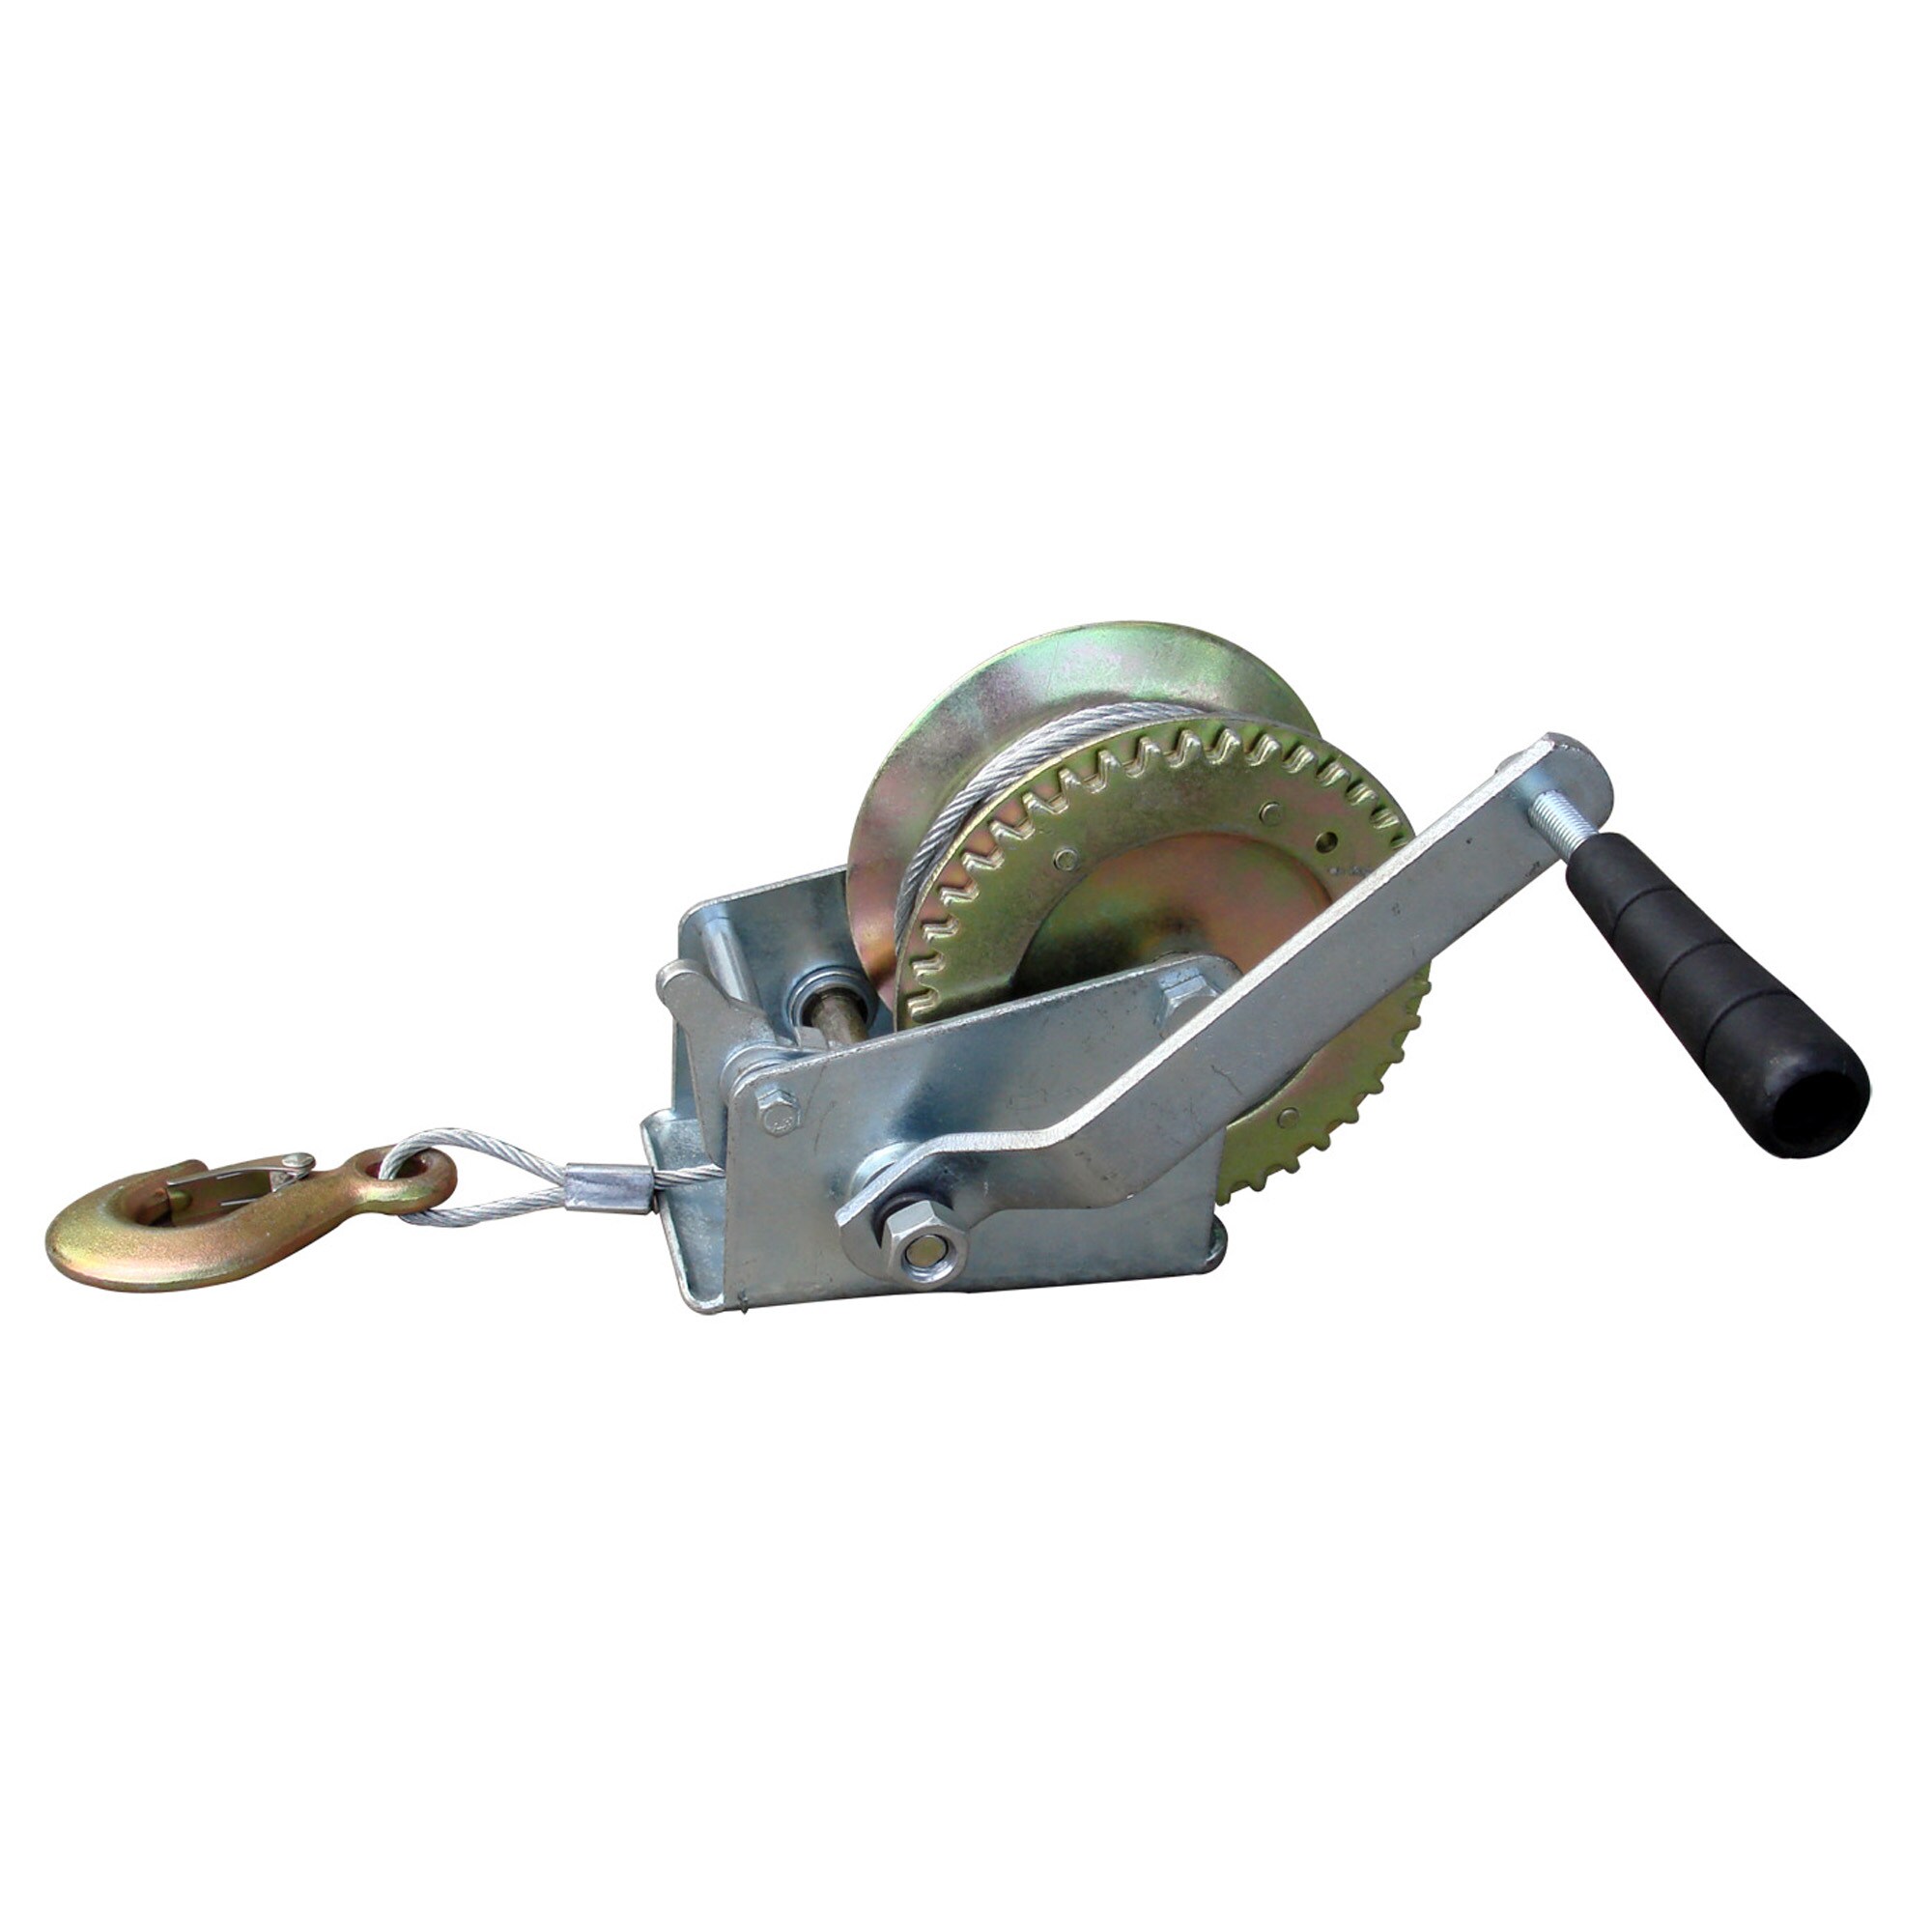 Sportsman W1000 1000 lb 1/4'' x 32' Steel Cable Hand Winch - image 2 of 2